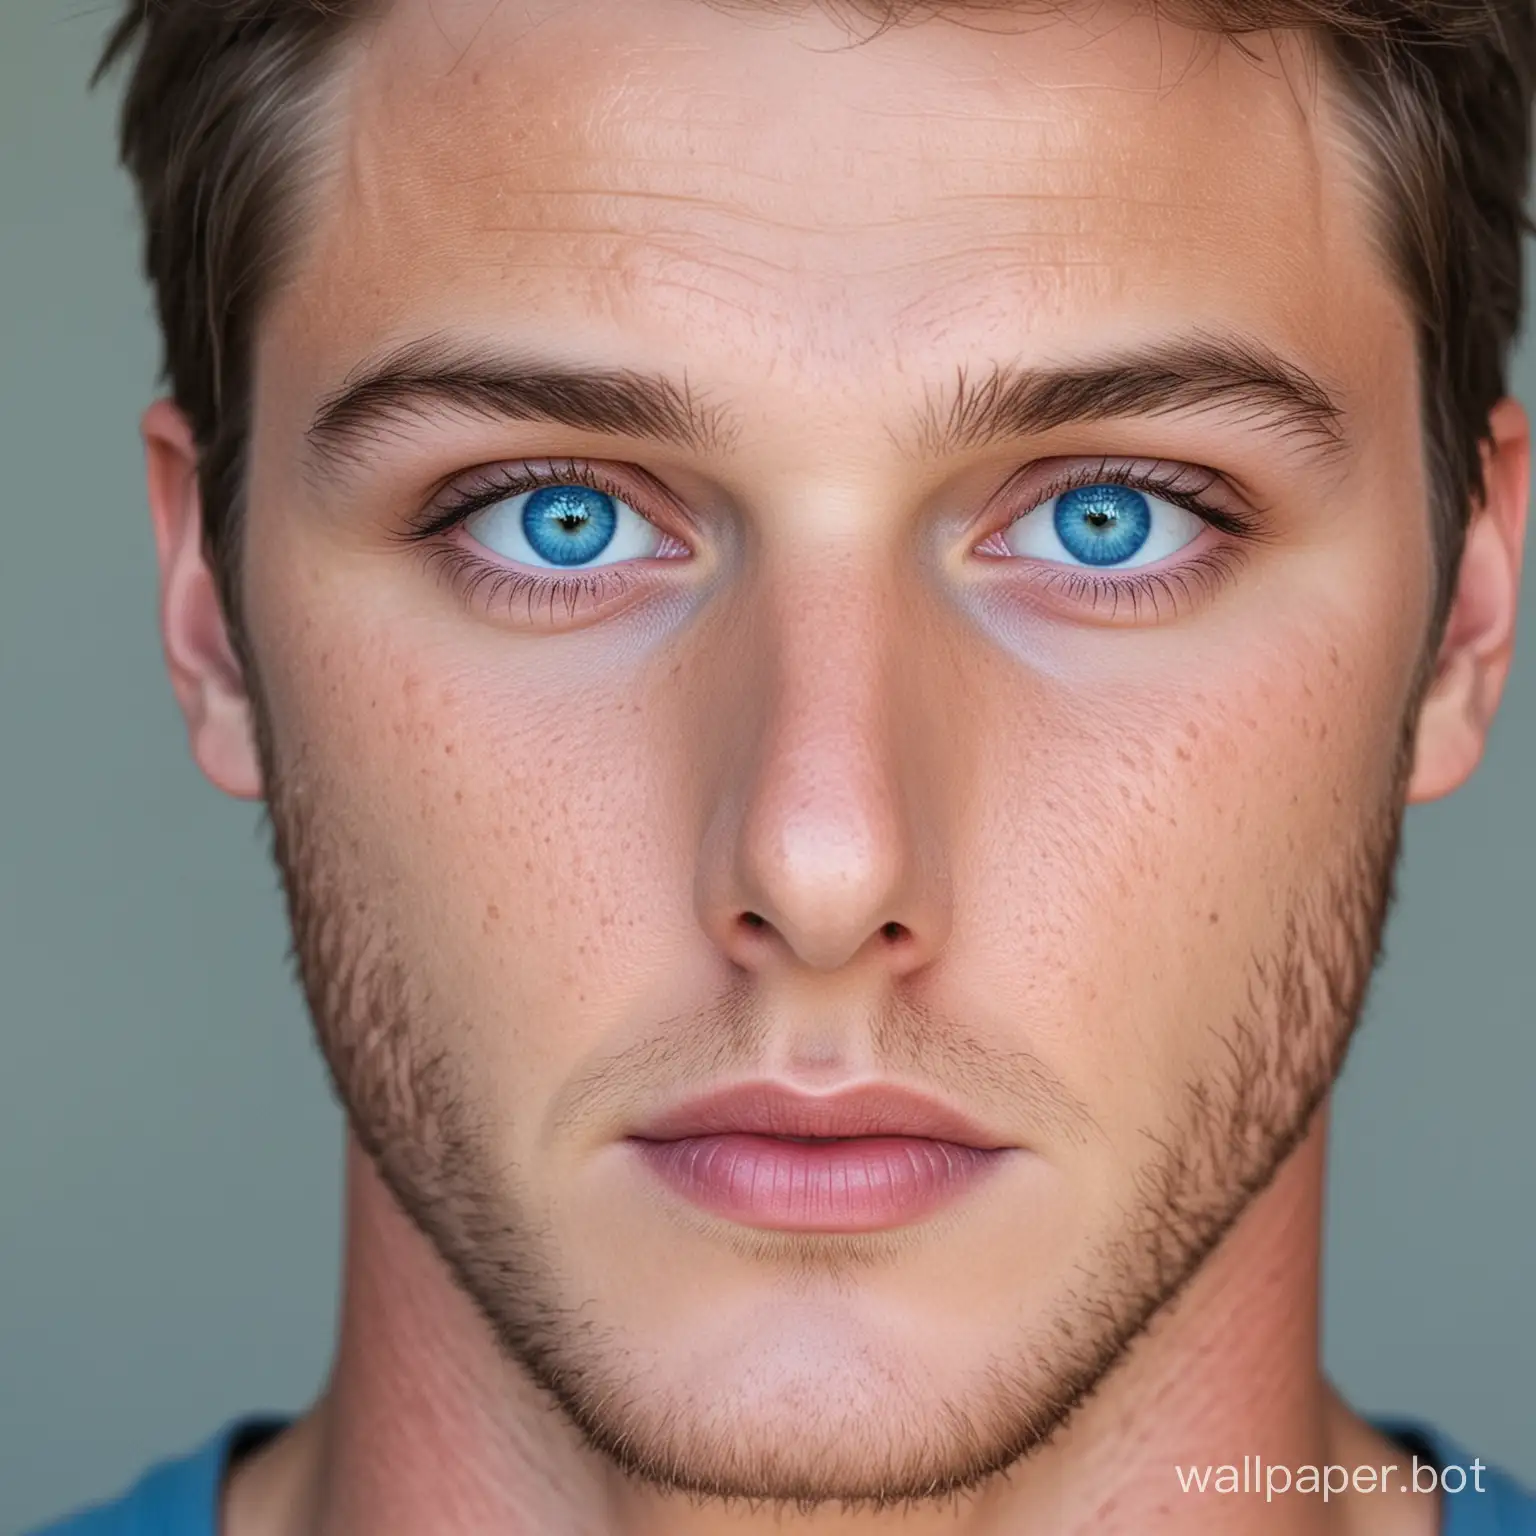 Guy with blue eyes